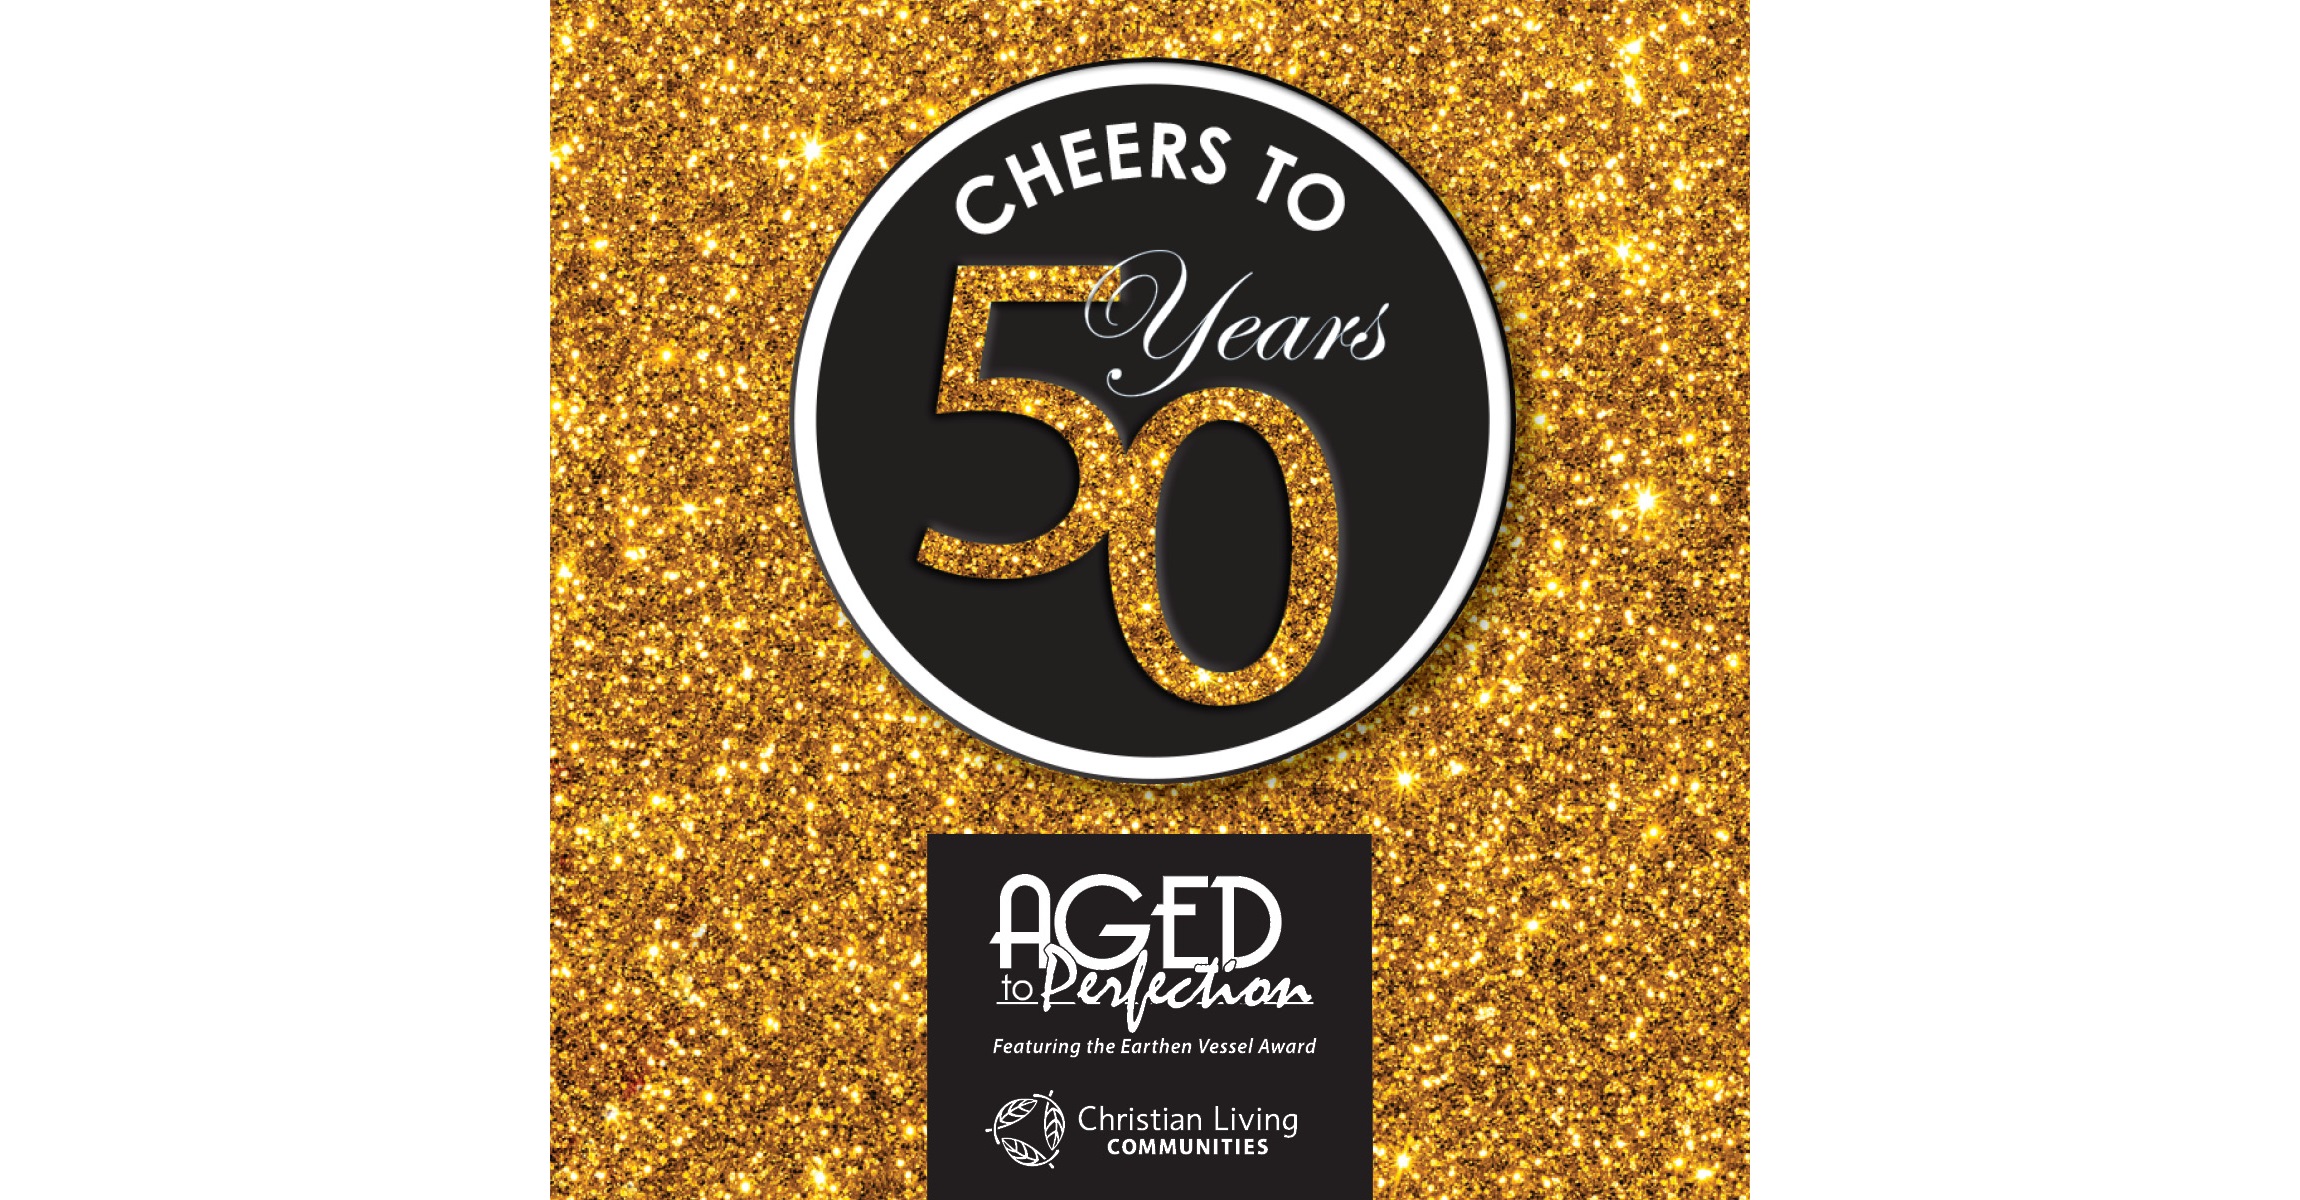 Aged to Perfection event graphic - Cheers to 50 Years